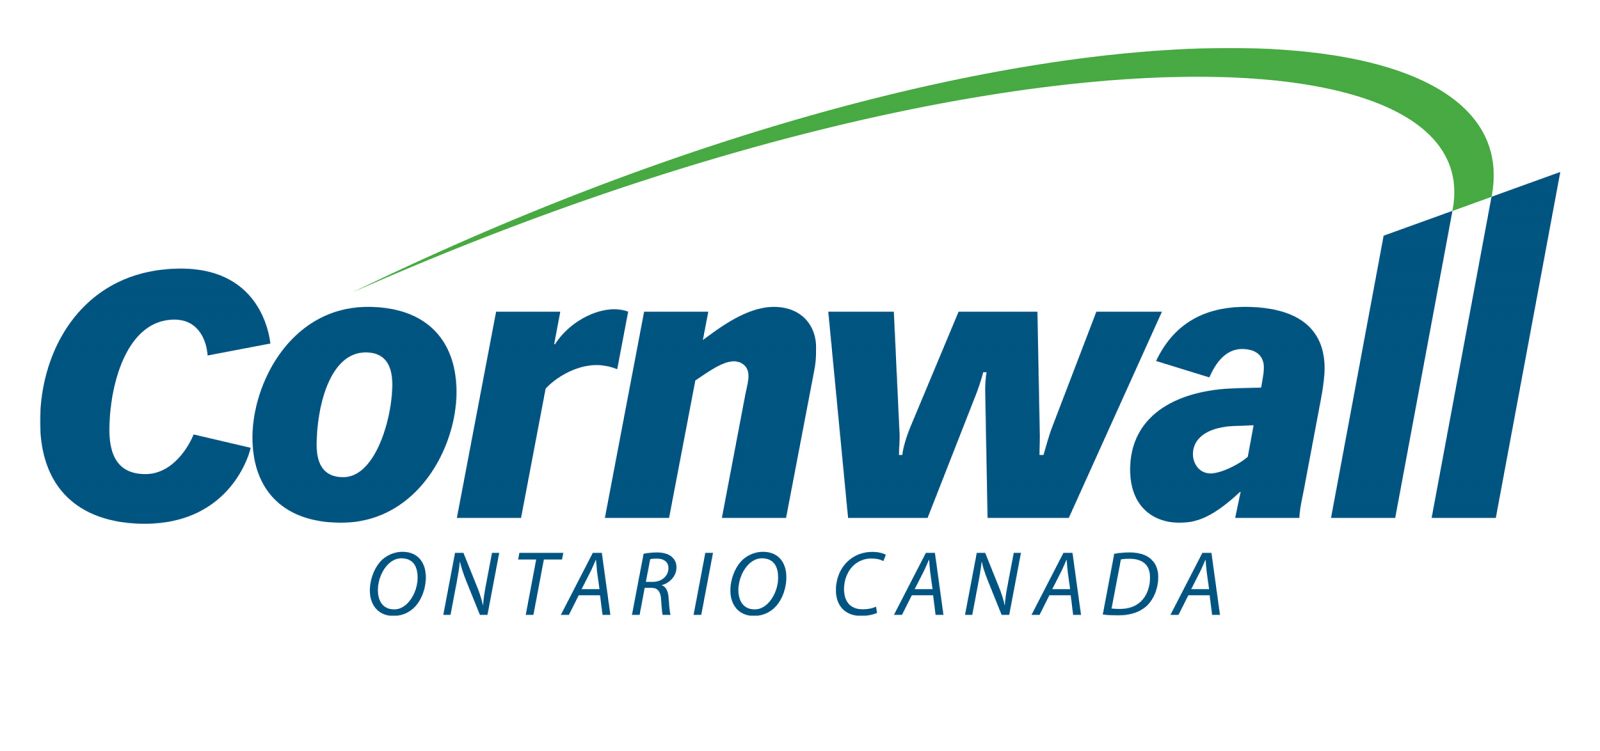 City of Cornwall Awarded TD Green Space Grant